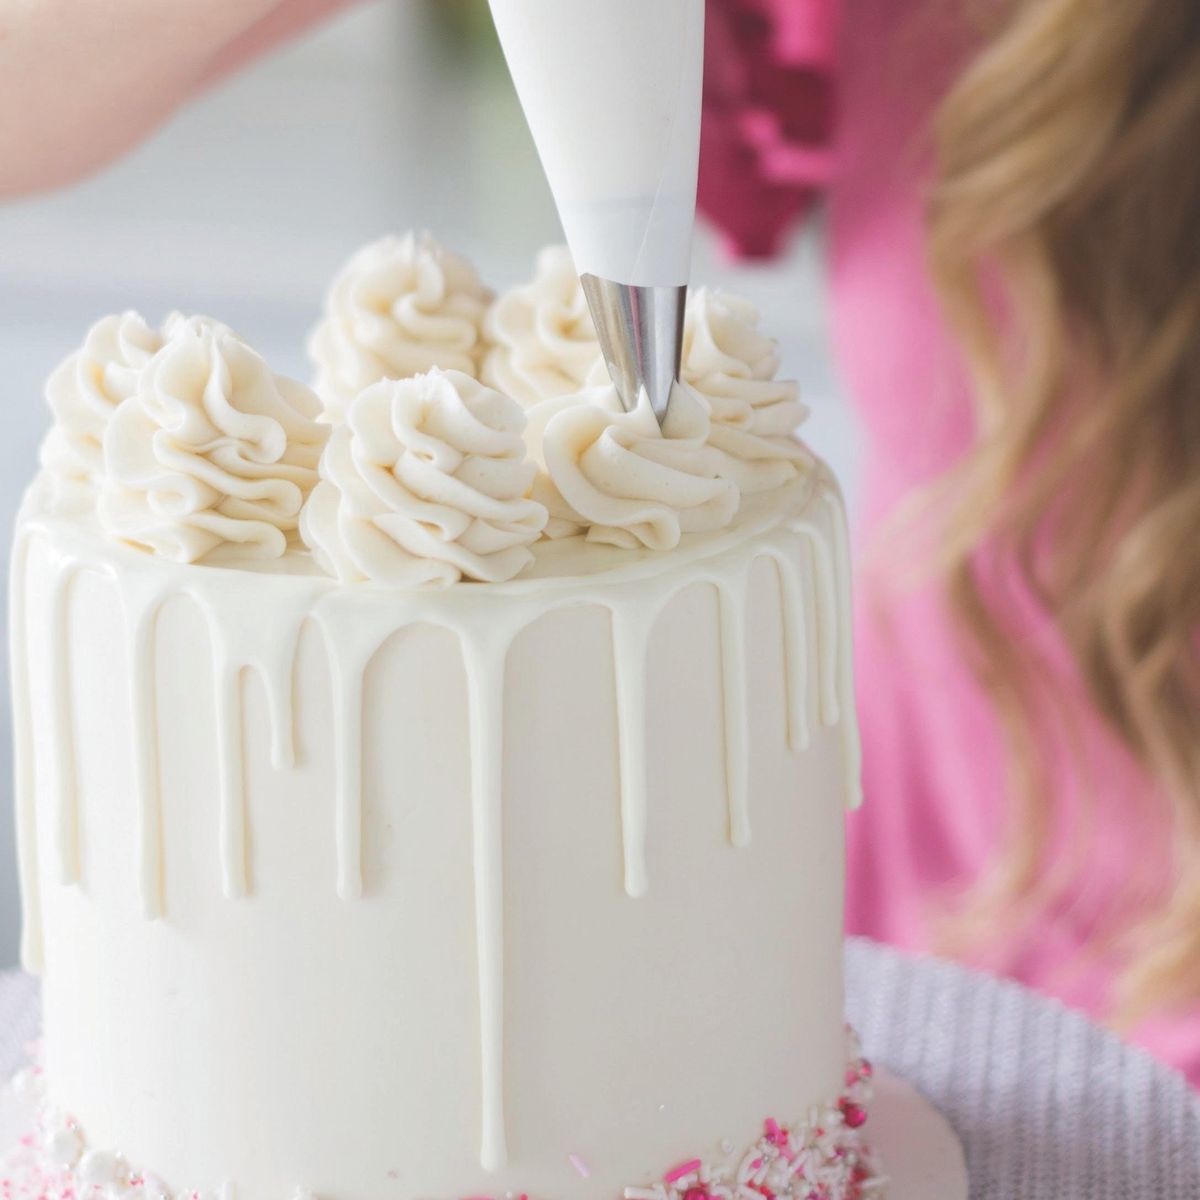 So This Is How You Decorate a Cake Like a Pro